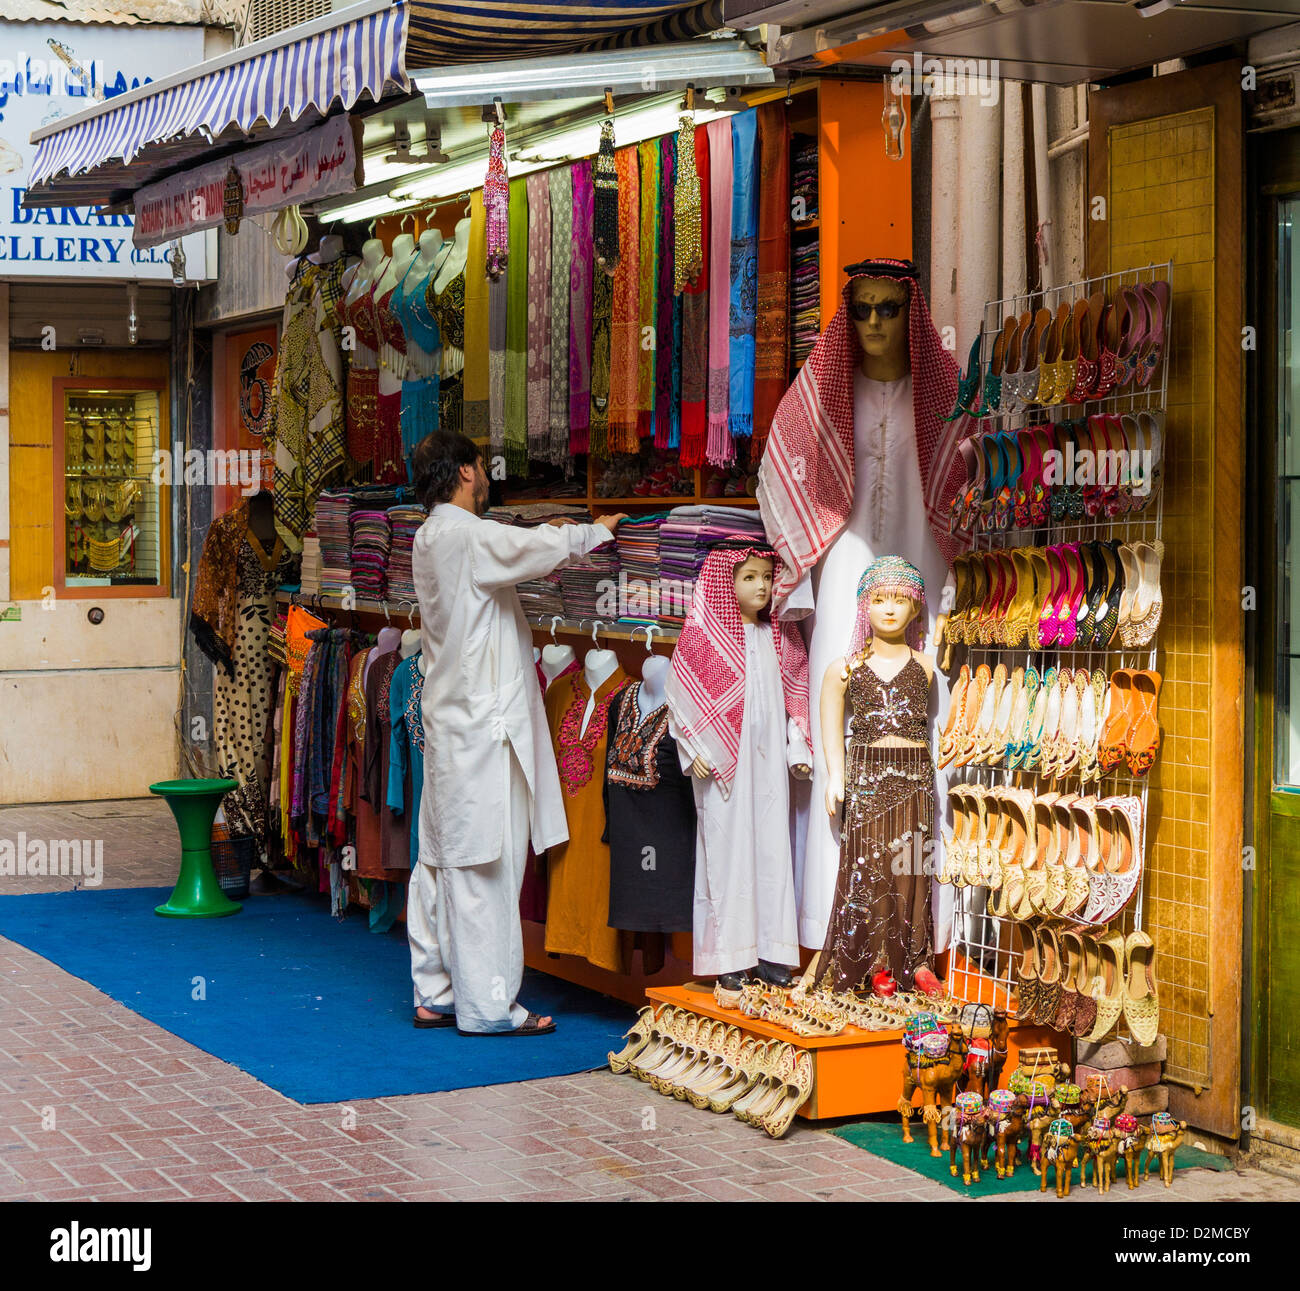 A traditional clothing stall in a Dubai Souk Stock Photo